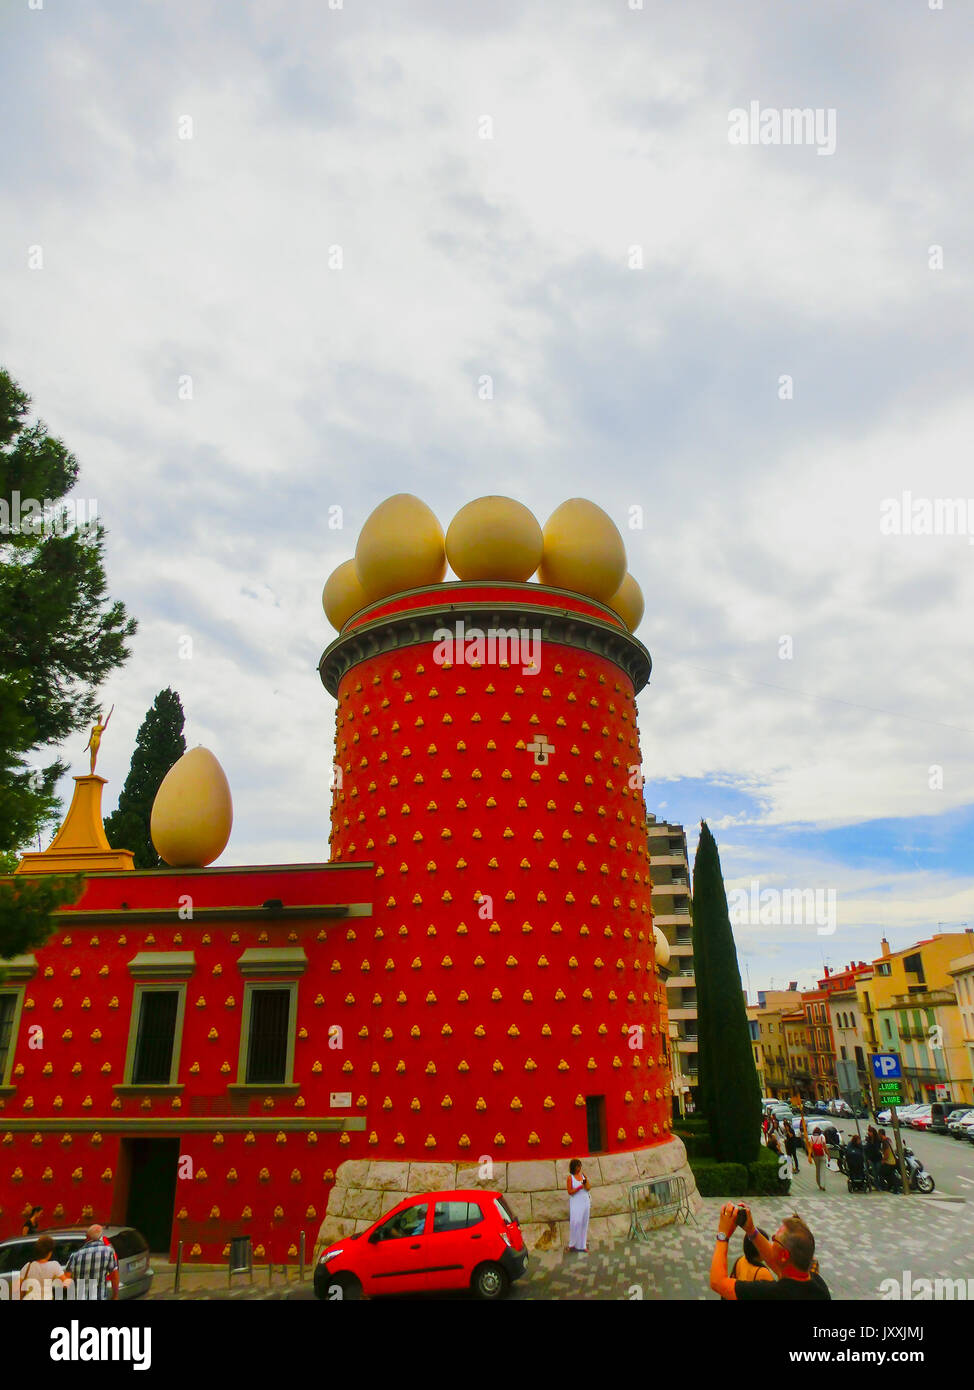 Figueres, Spain - September 15, 2015: Dali Museum in Figueres, Spain Stock Photo